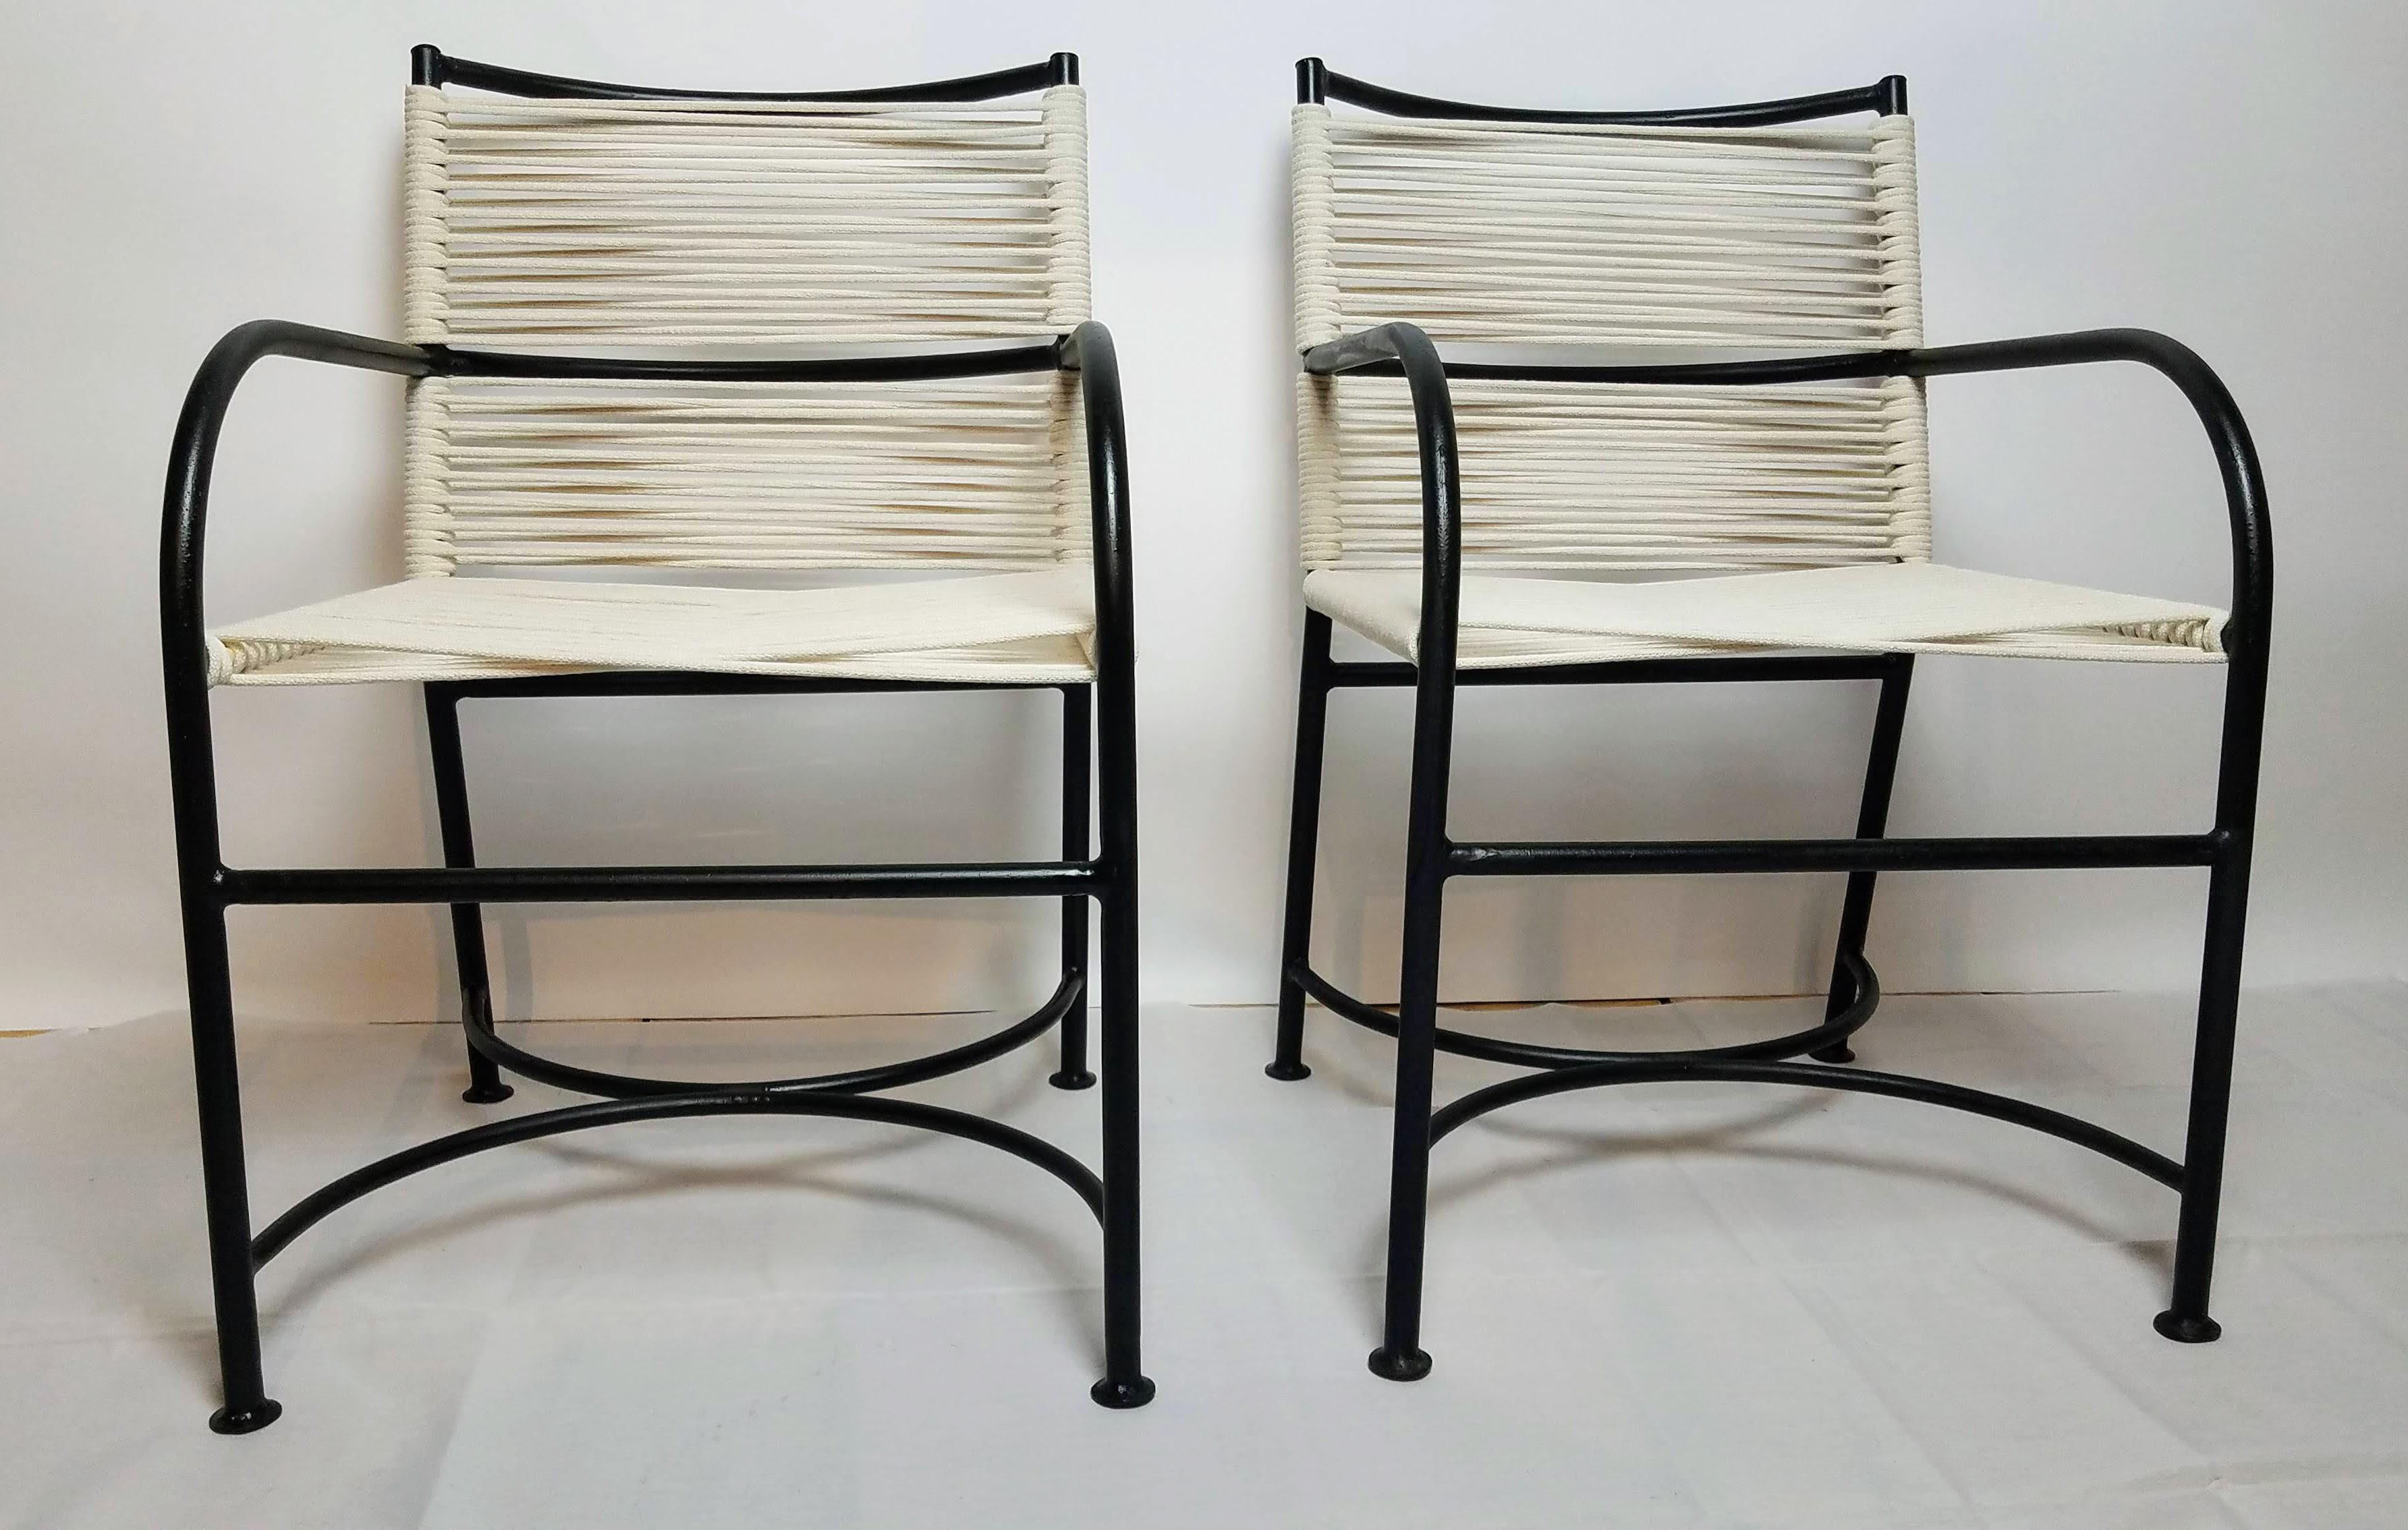 Pair of Robert Lewis steel pipe armchairs circa 1940 hand crafted in Santa Barbara, CA. . 
Classic outdoor chairs.
The chairs are in very good condition.